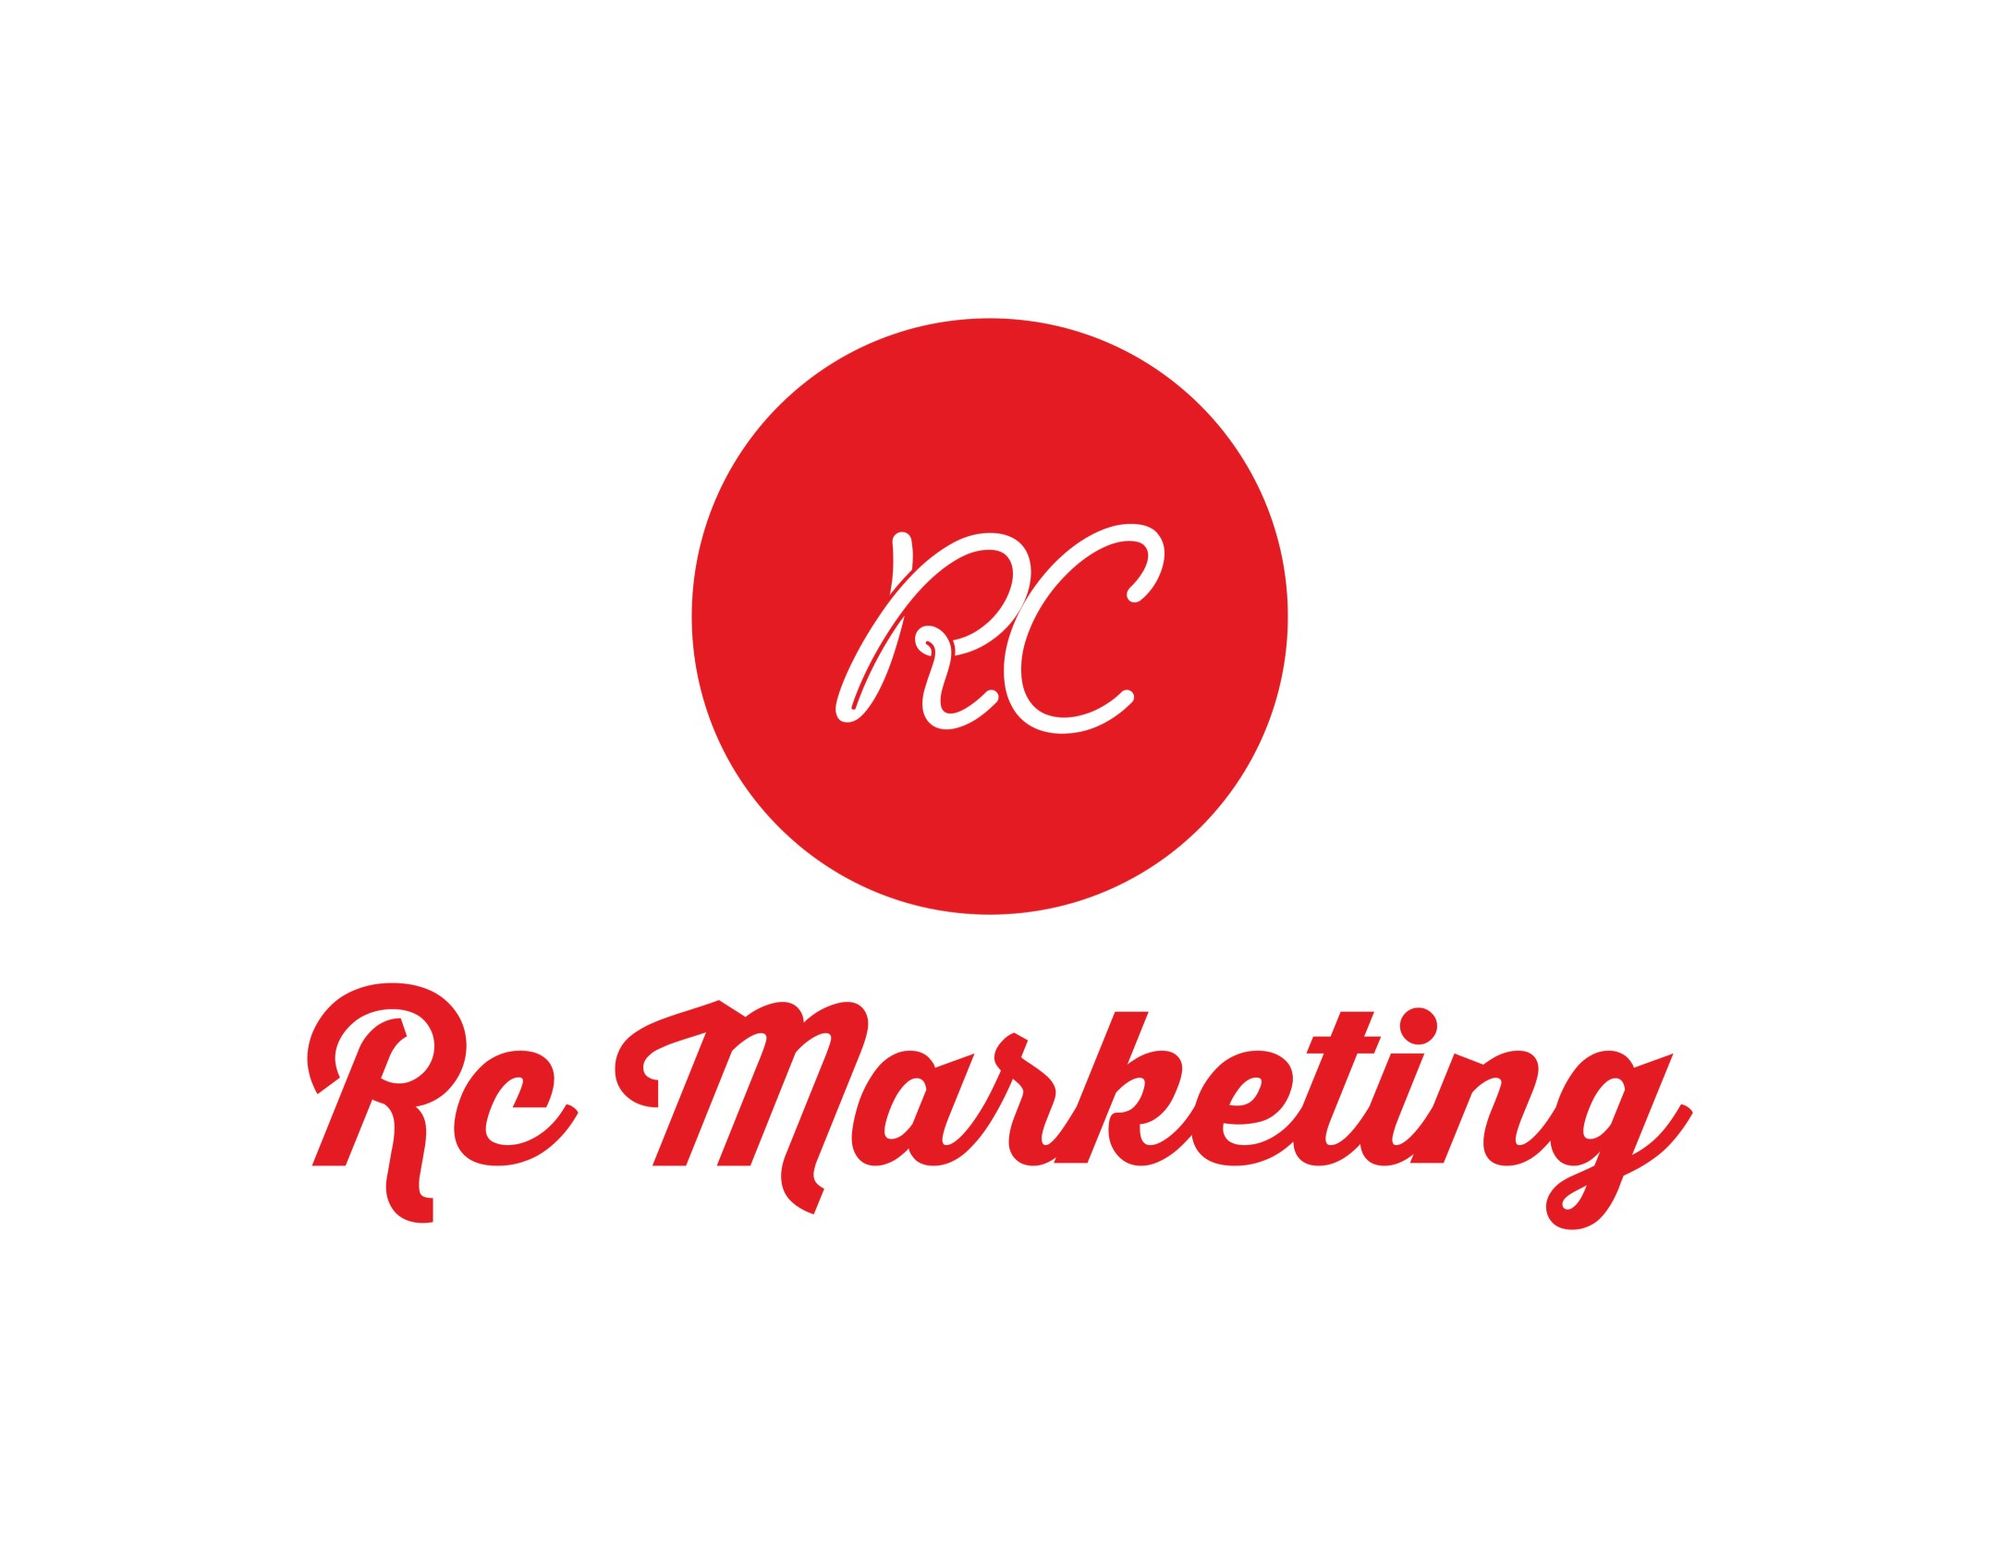 Take Your Business to the Next Level - RC Marketing